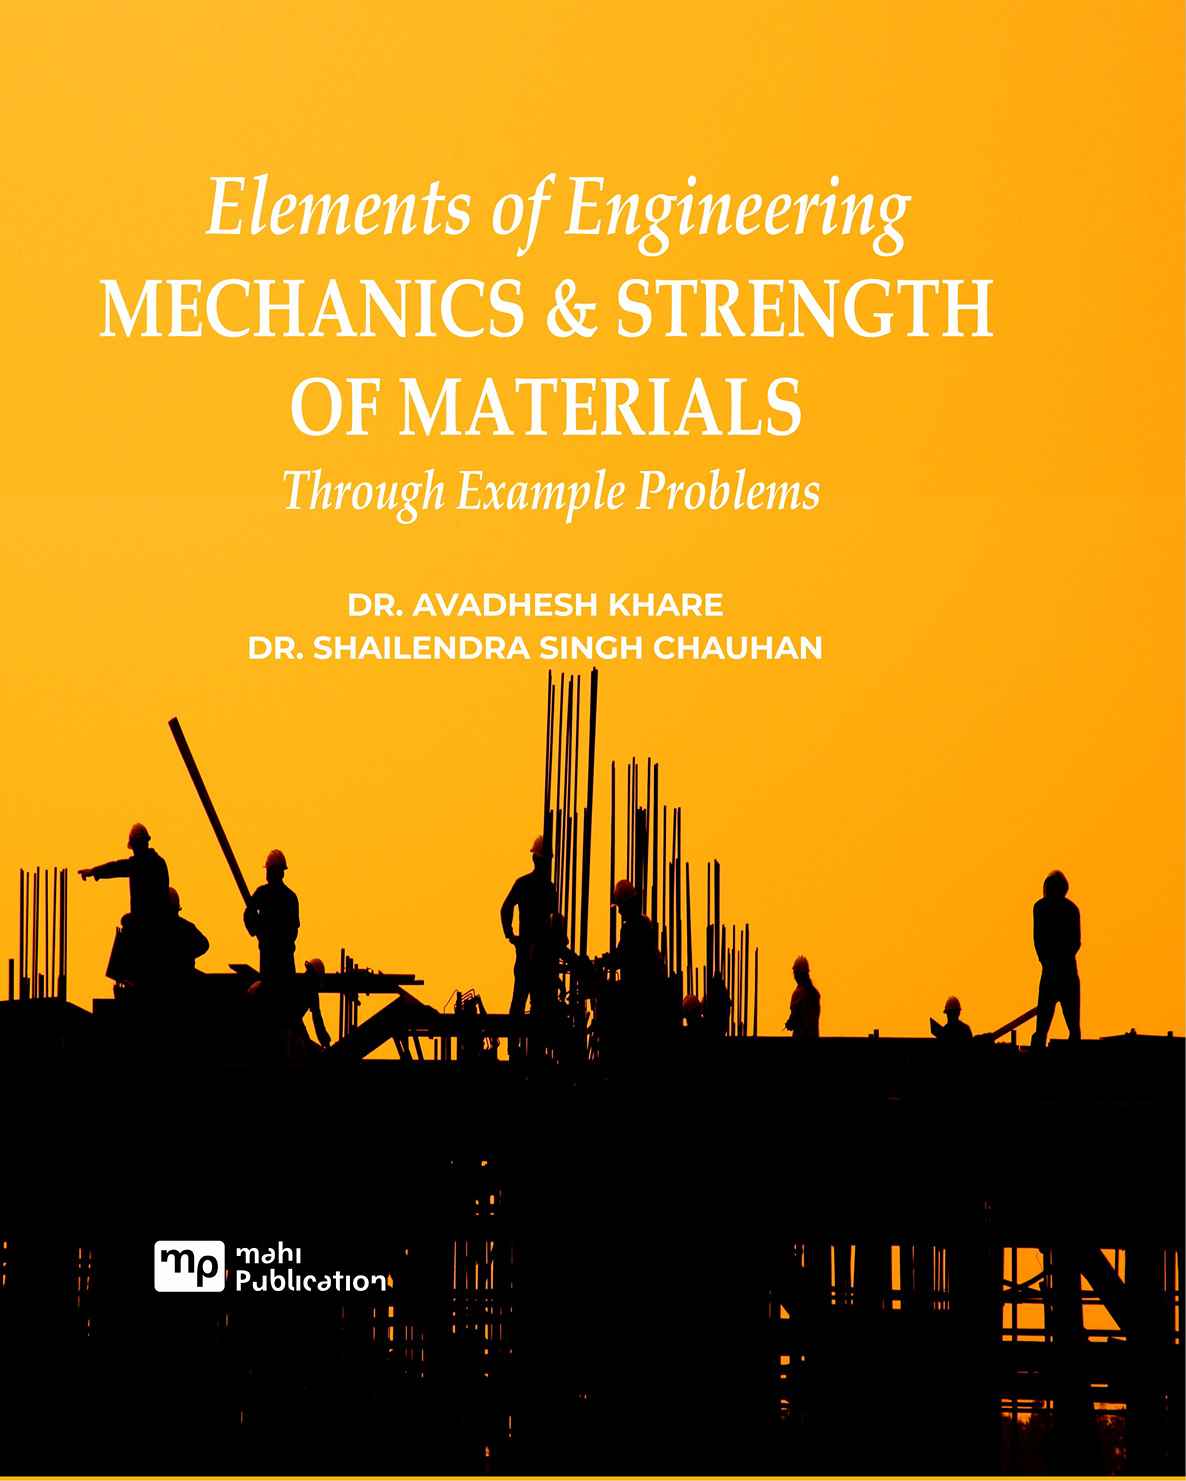 Elements of Engineering Mechanics & Strength of Materials [ Through Example Problems]